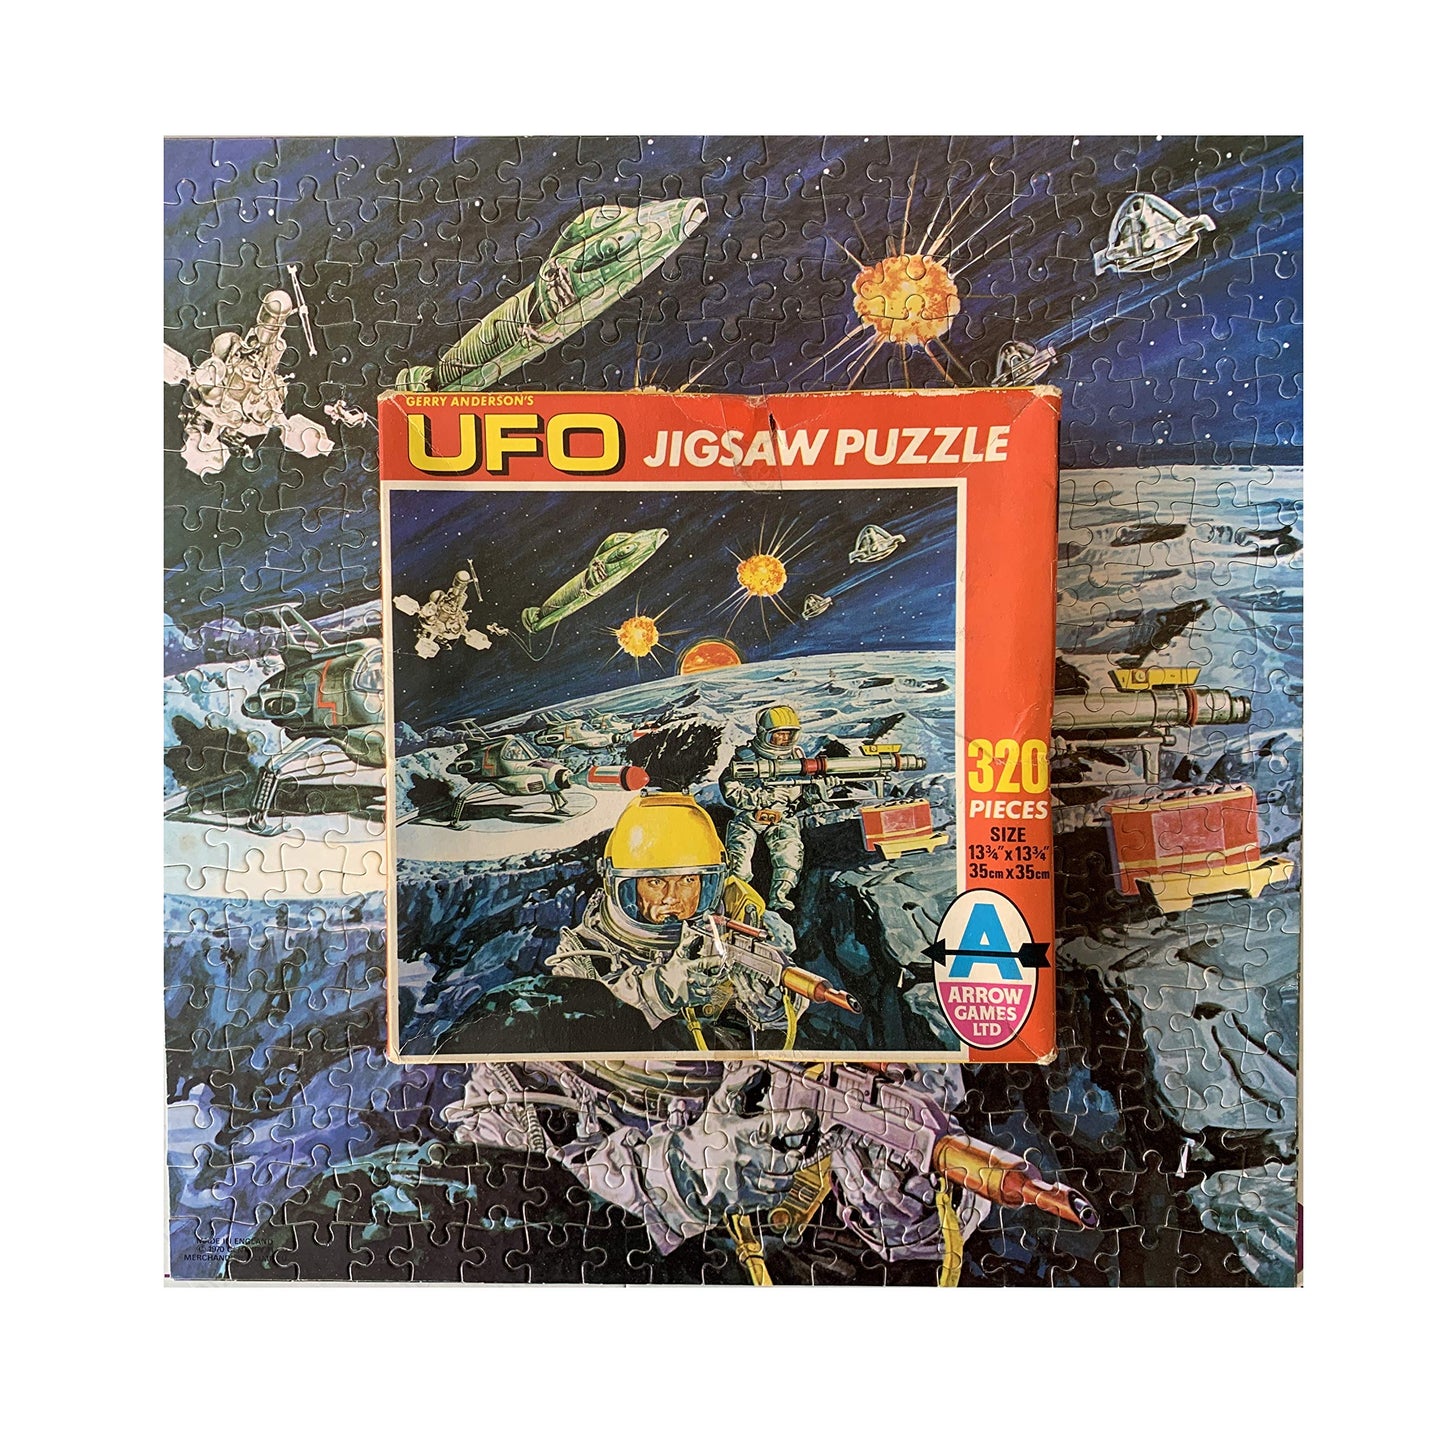 Vintage Gerry Andersons Arrow Games Ltd 1970 UFO 320 Piece Jigsaw Puzzle No. 2316 The Attack On Moonbase - Complete And In The Original Box